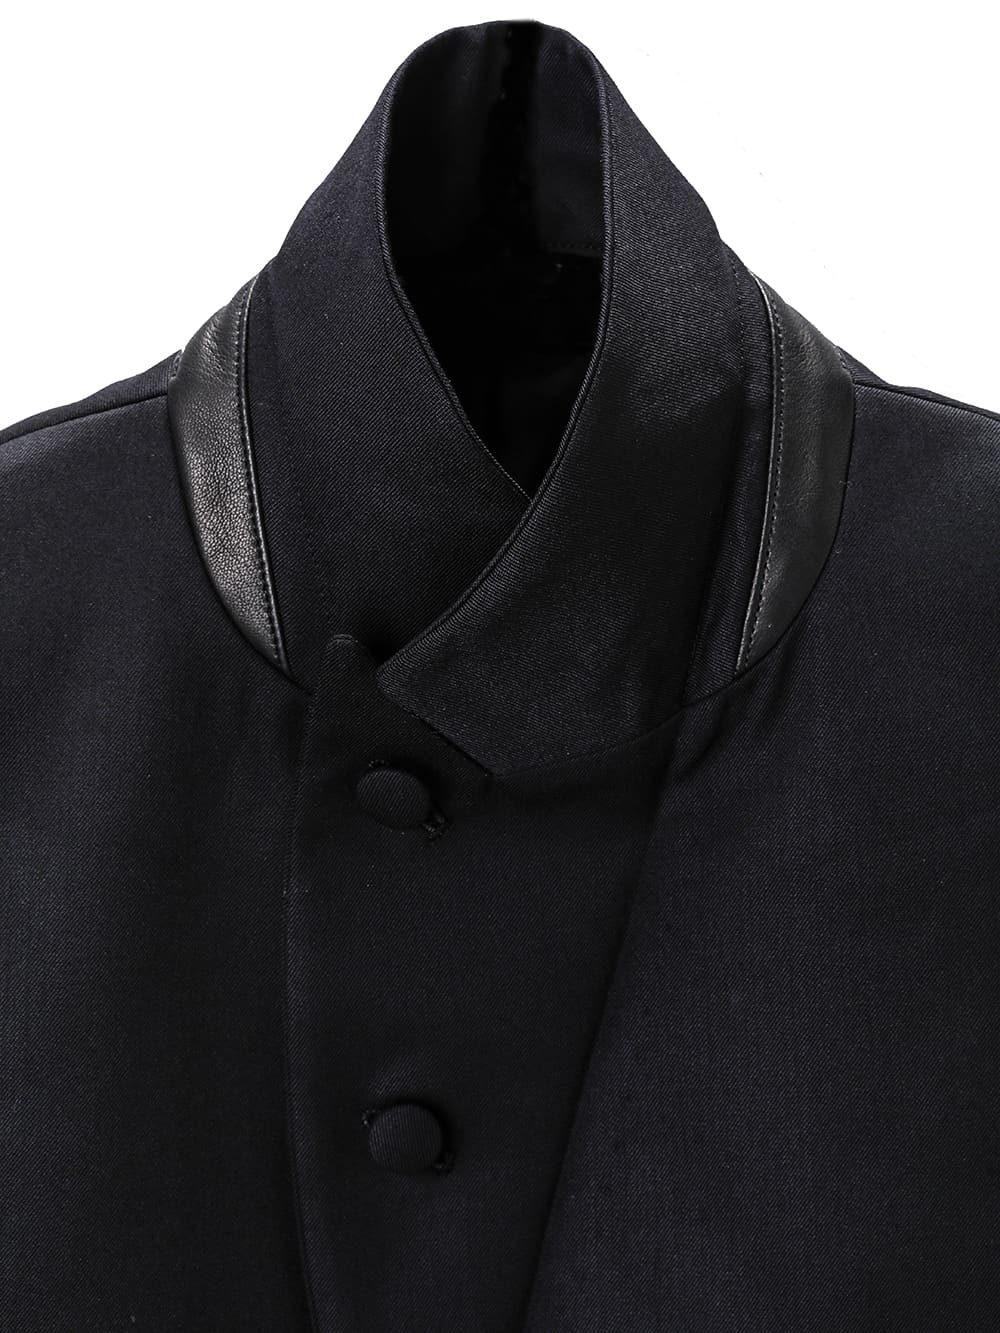 french peaked lapel attachment jacket.